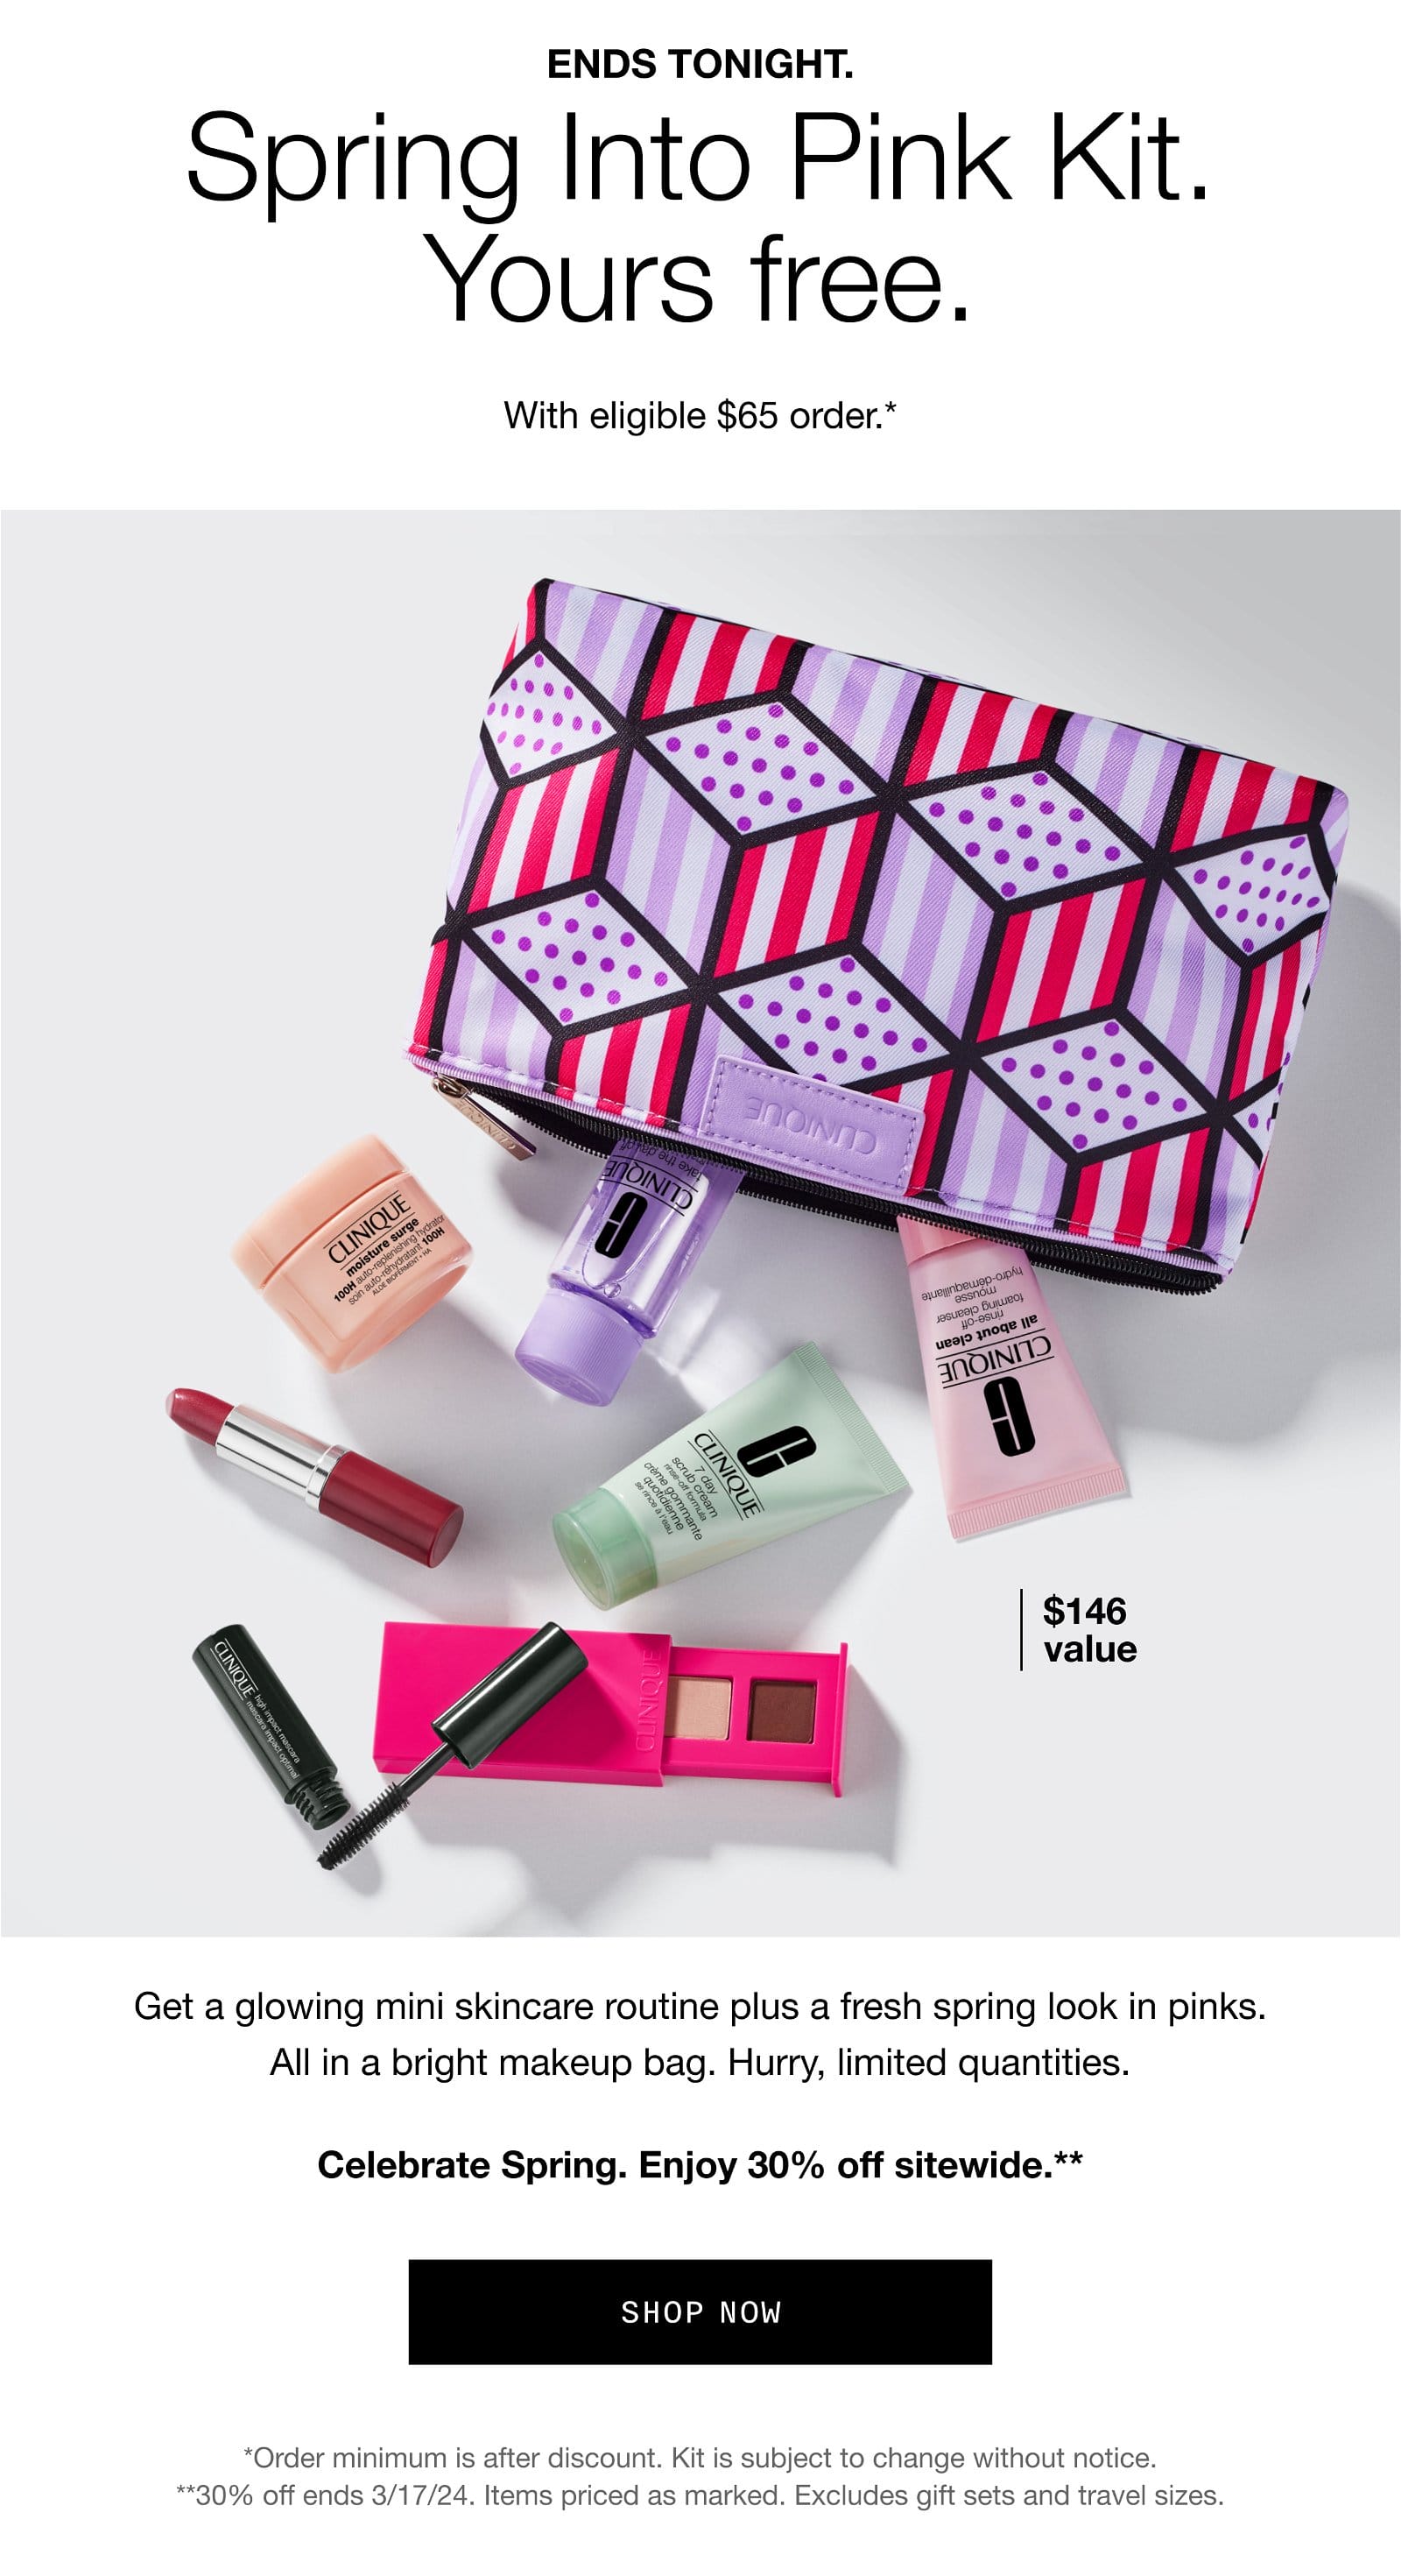 ENDS TONIGHT. Spring Into Pink Kit. Yours free. With eligible \\$65 order.* | \\$146 value | Get a glowing mini skincare routine plus a fresh spring look in pinks. All in a bright makeup bag. Hurry, limited quantities. Celebrate Spring. Enjoy 30% off sitewide.** | SHOP NOW | *Order minimum is after discount. Kit is subject to change without notice. **30% off ends 3/17/24. Items priced as marked. Excludes gift sets and travel sizes.